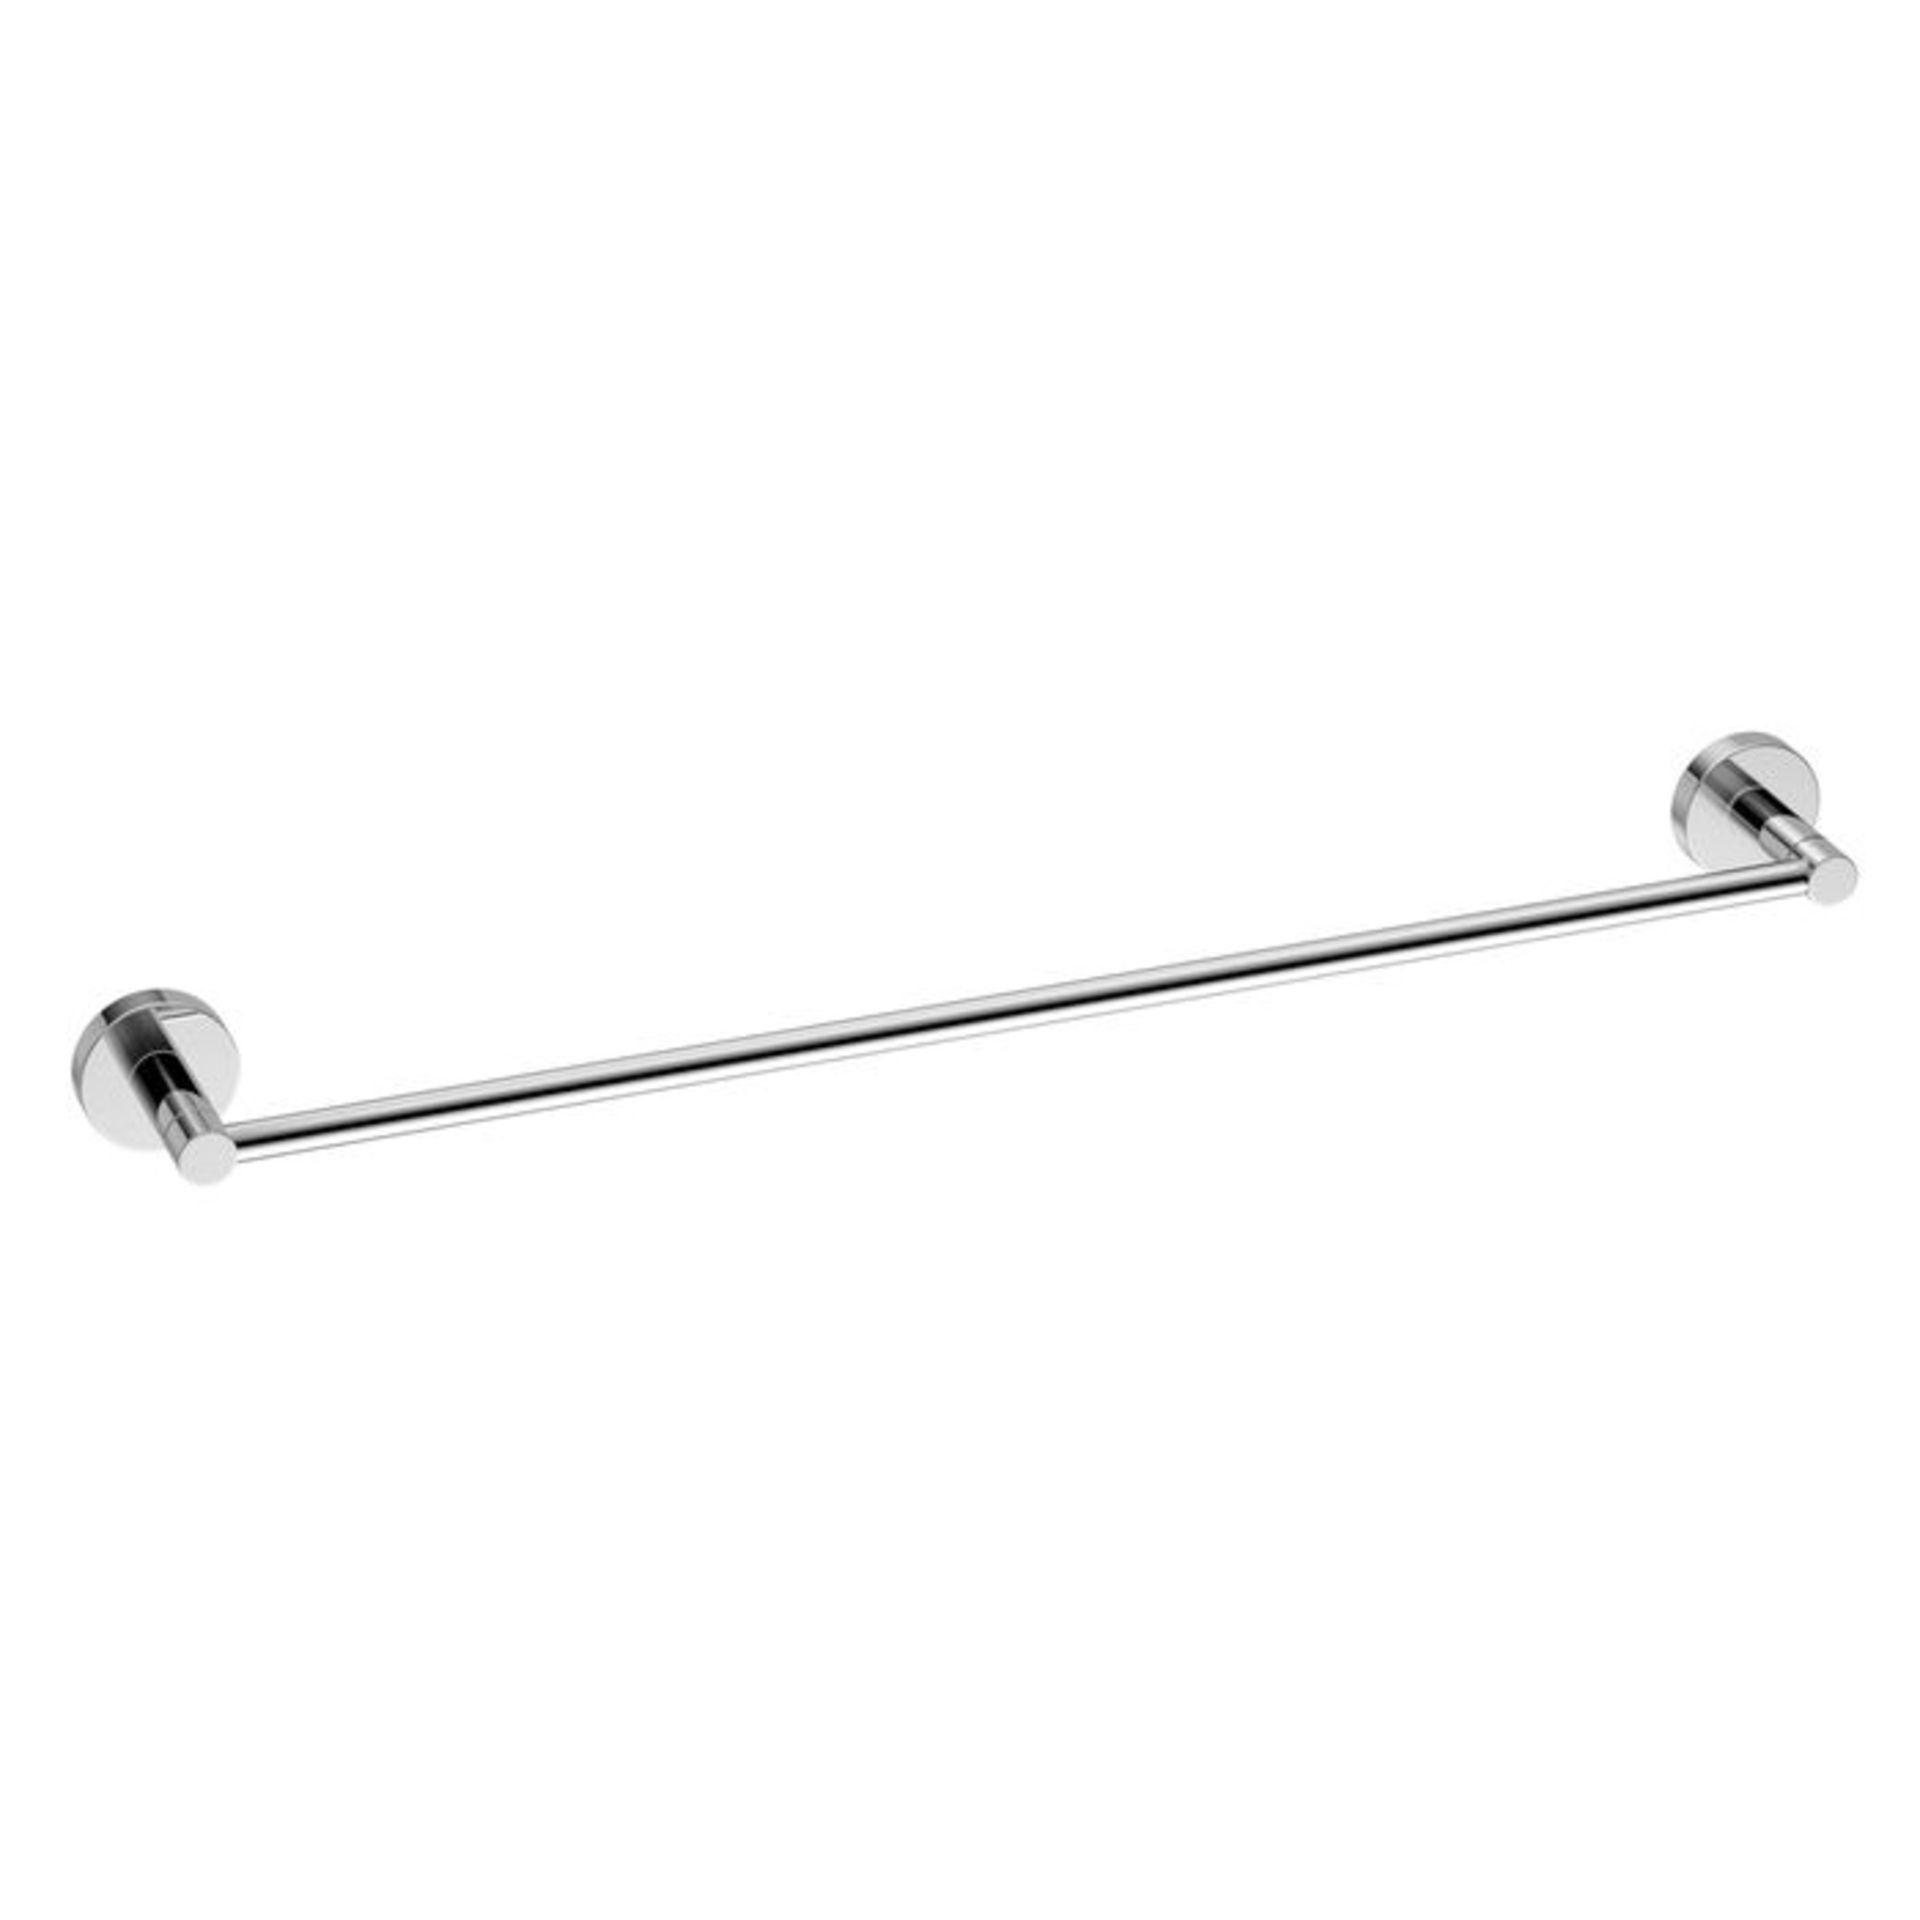 (E1030) Finsbury Towel Rail. Designed to conceal all fittings Completes your bathroom with ... - Image 2 of 3